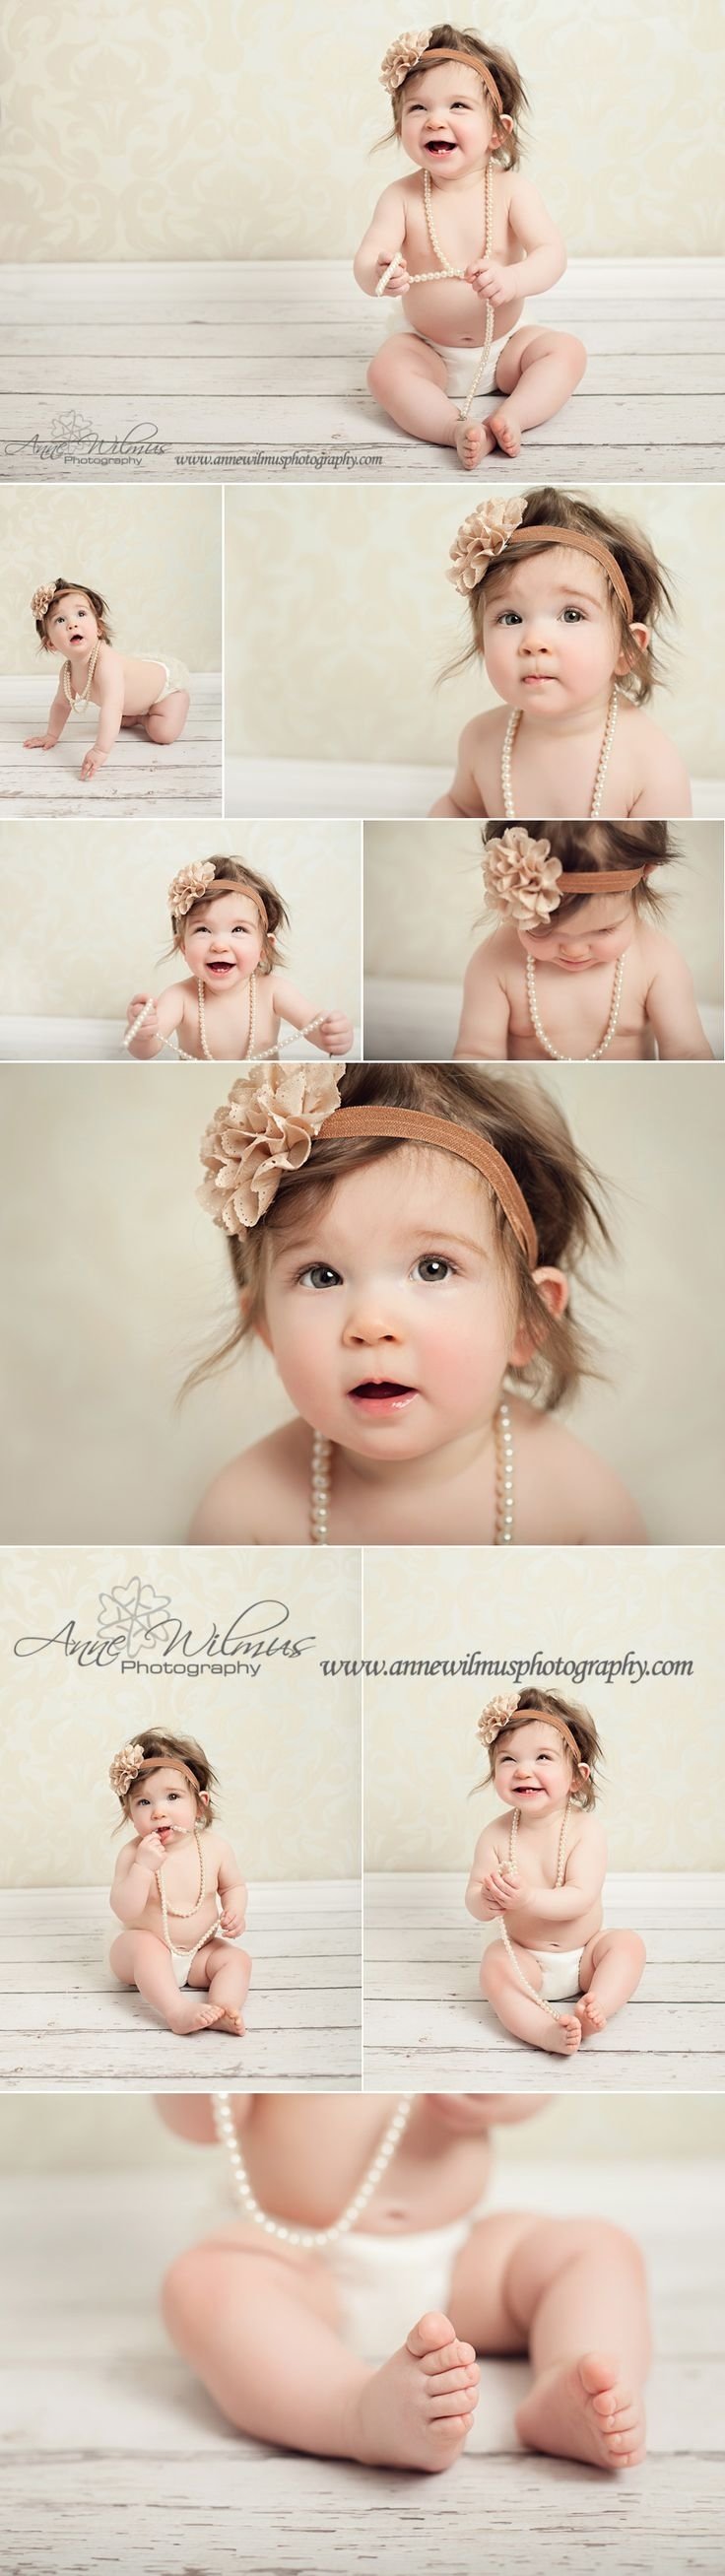 10 Great 6 Month Old Picture Ideas 145 best babies images on pinterest baby pictures children 2022